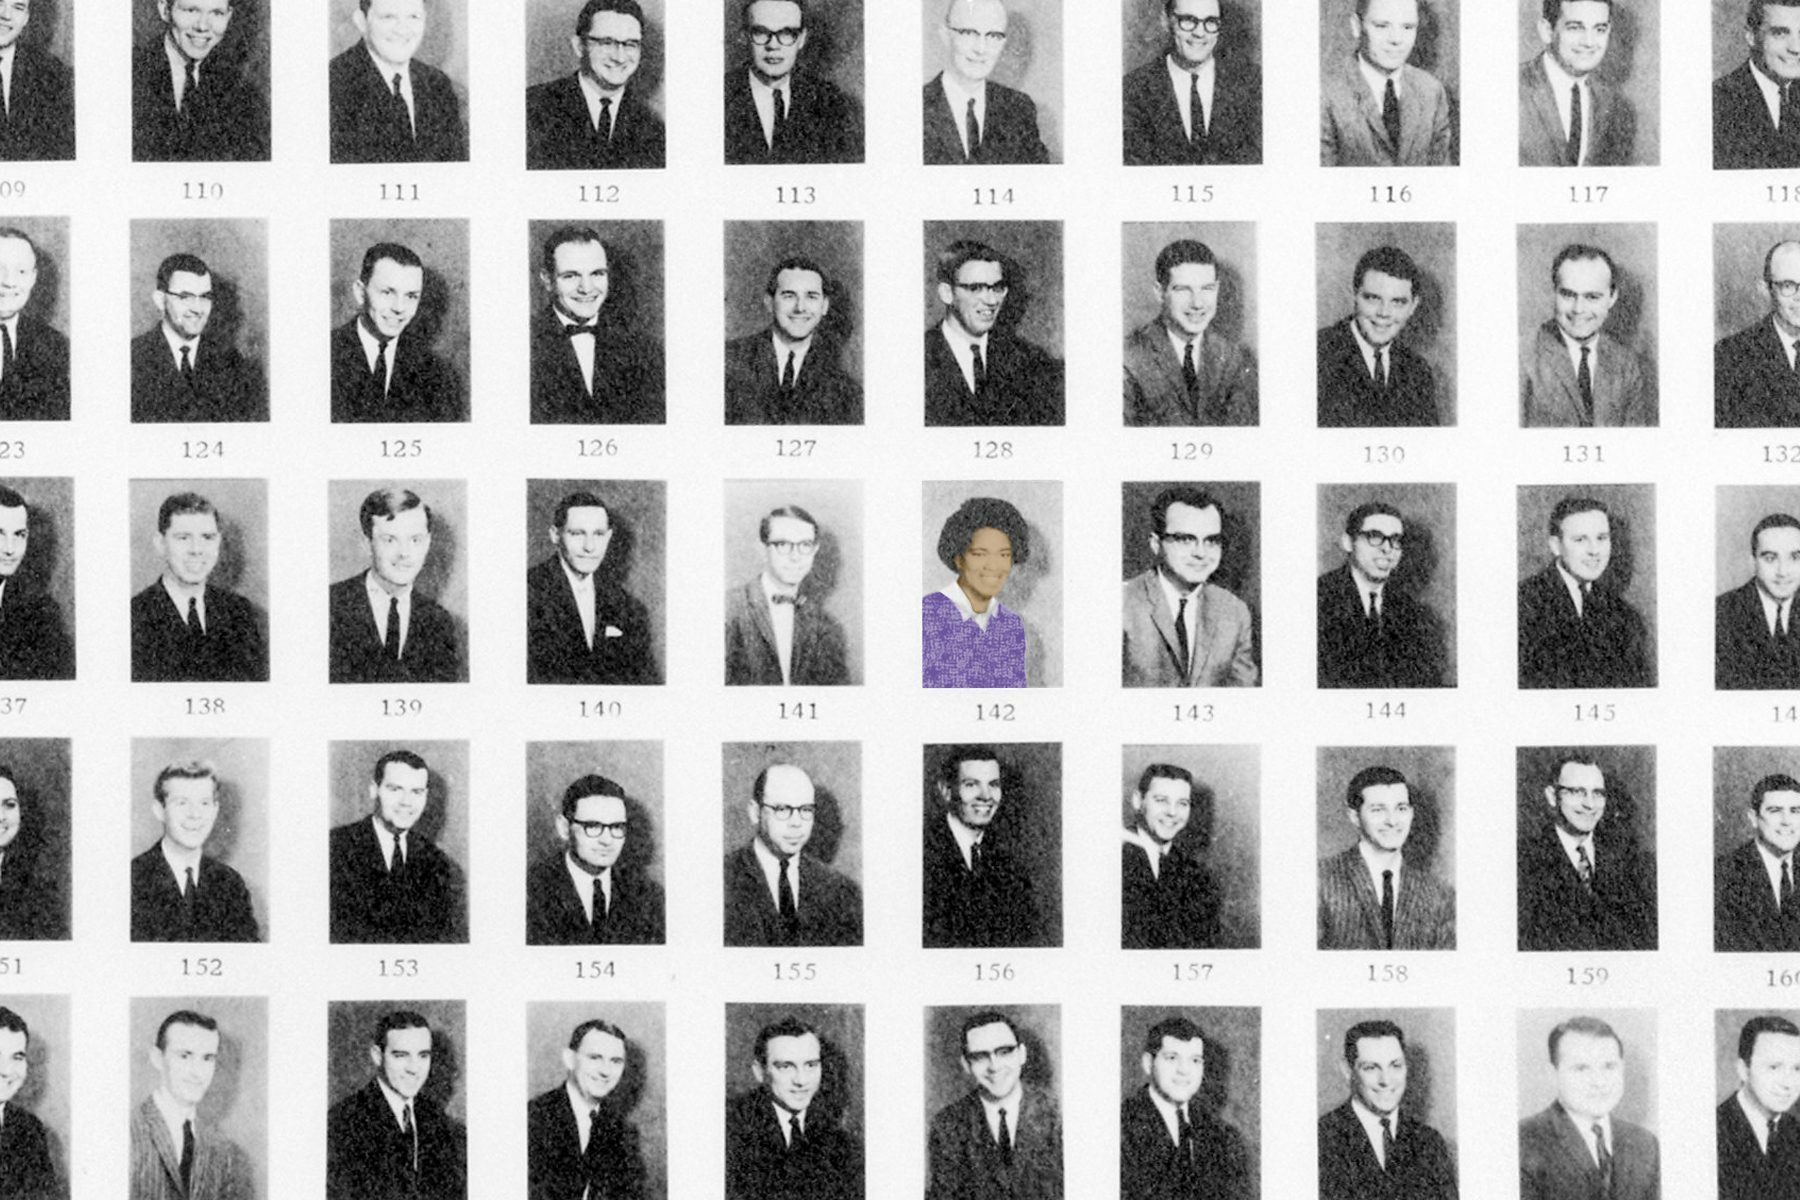 A photo illustration shows a colorized image of Amalya Lyle Kearse amongst black and white images of her male law school classmates.